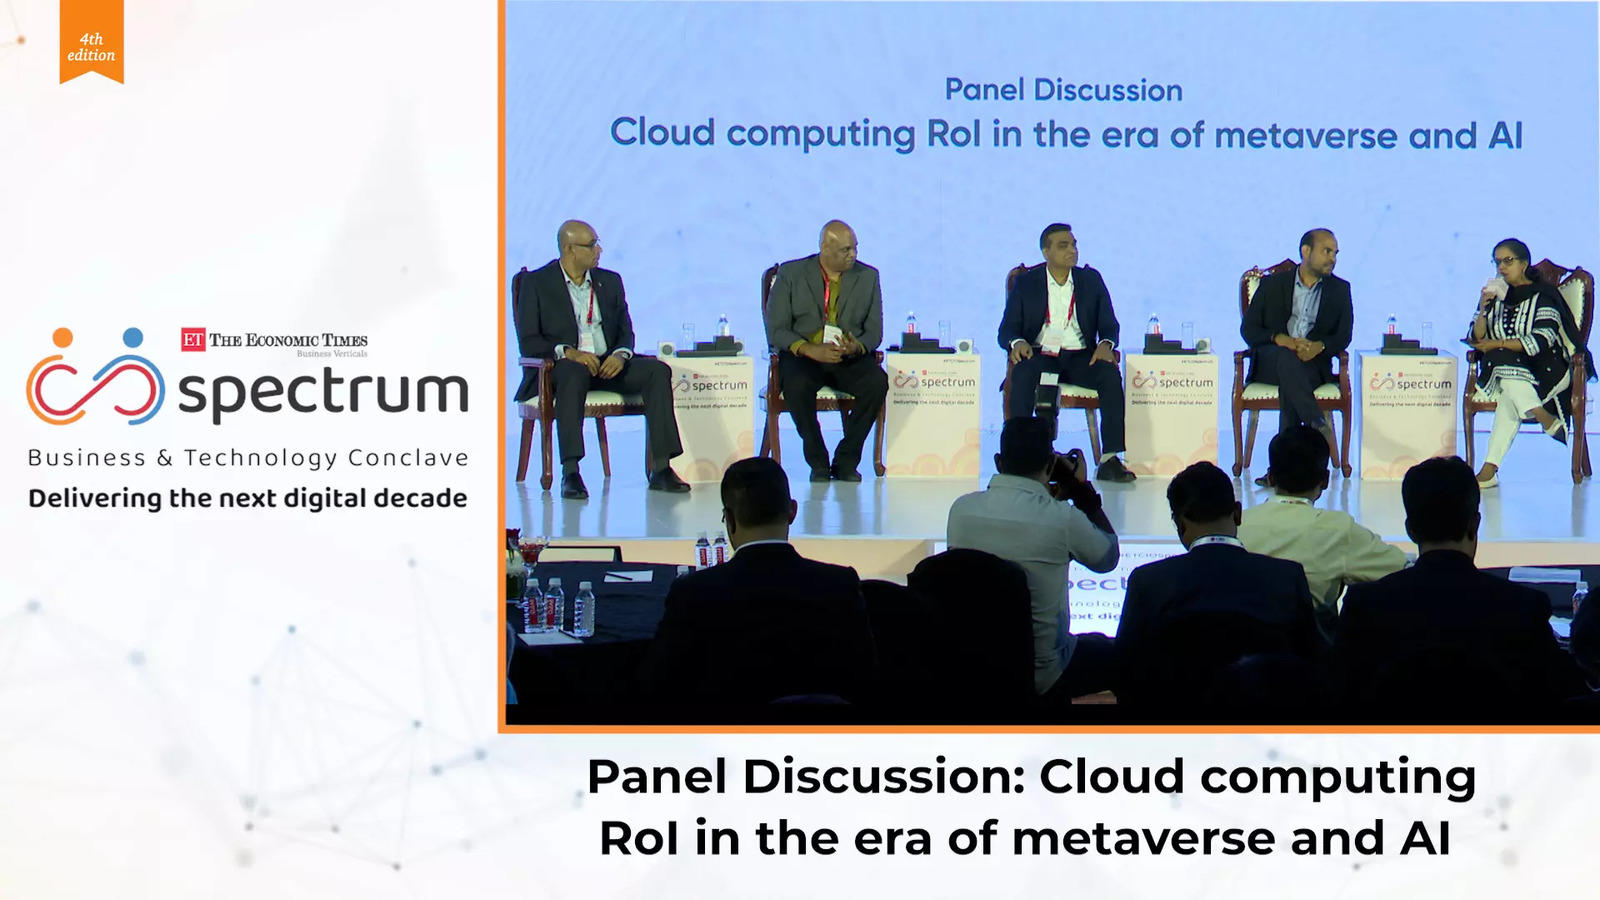 Experts weigh in on cloud computing RoI in the era of metaverse and AI [Video]